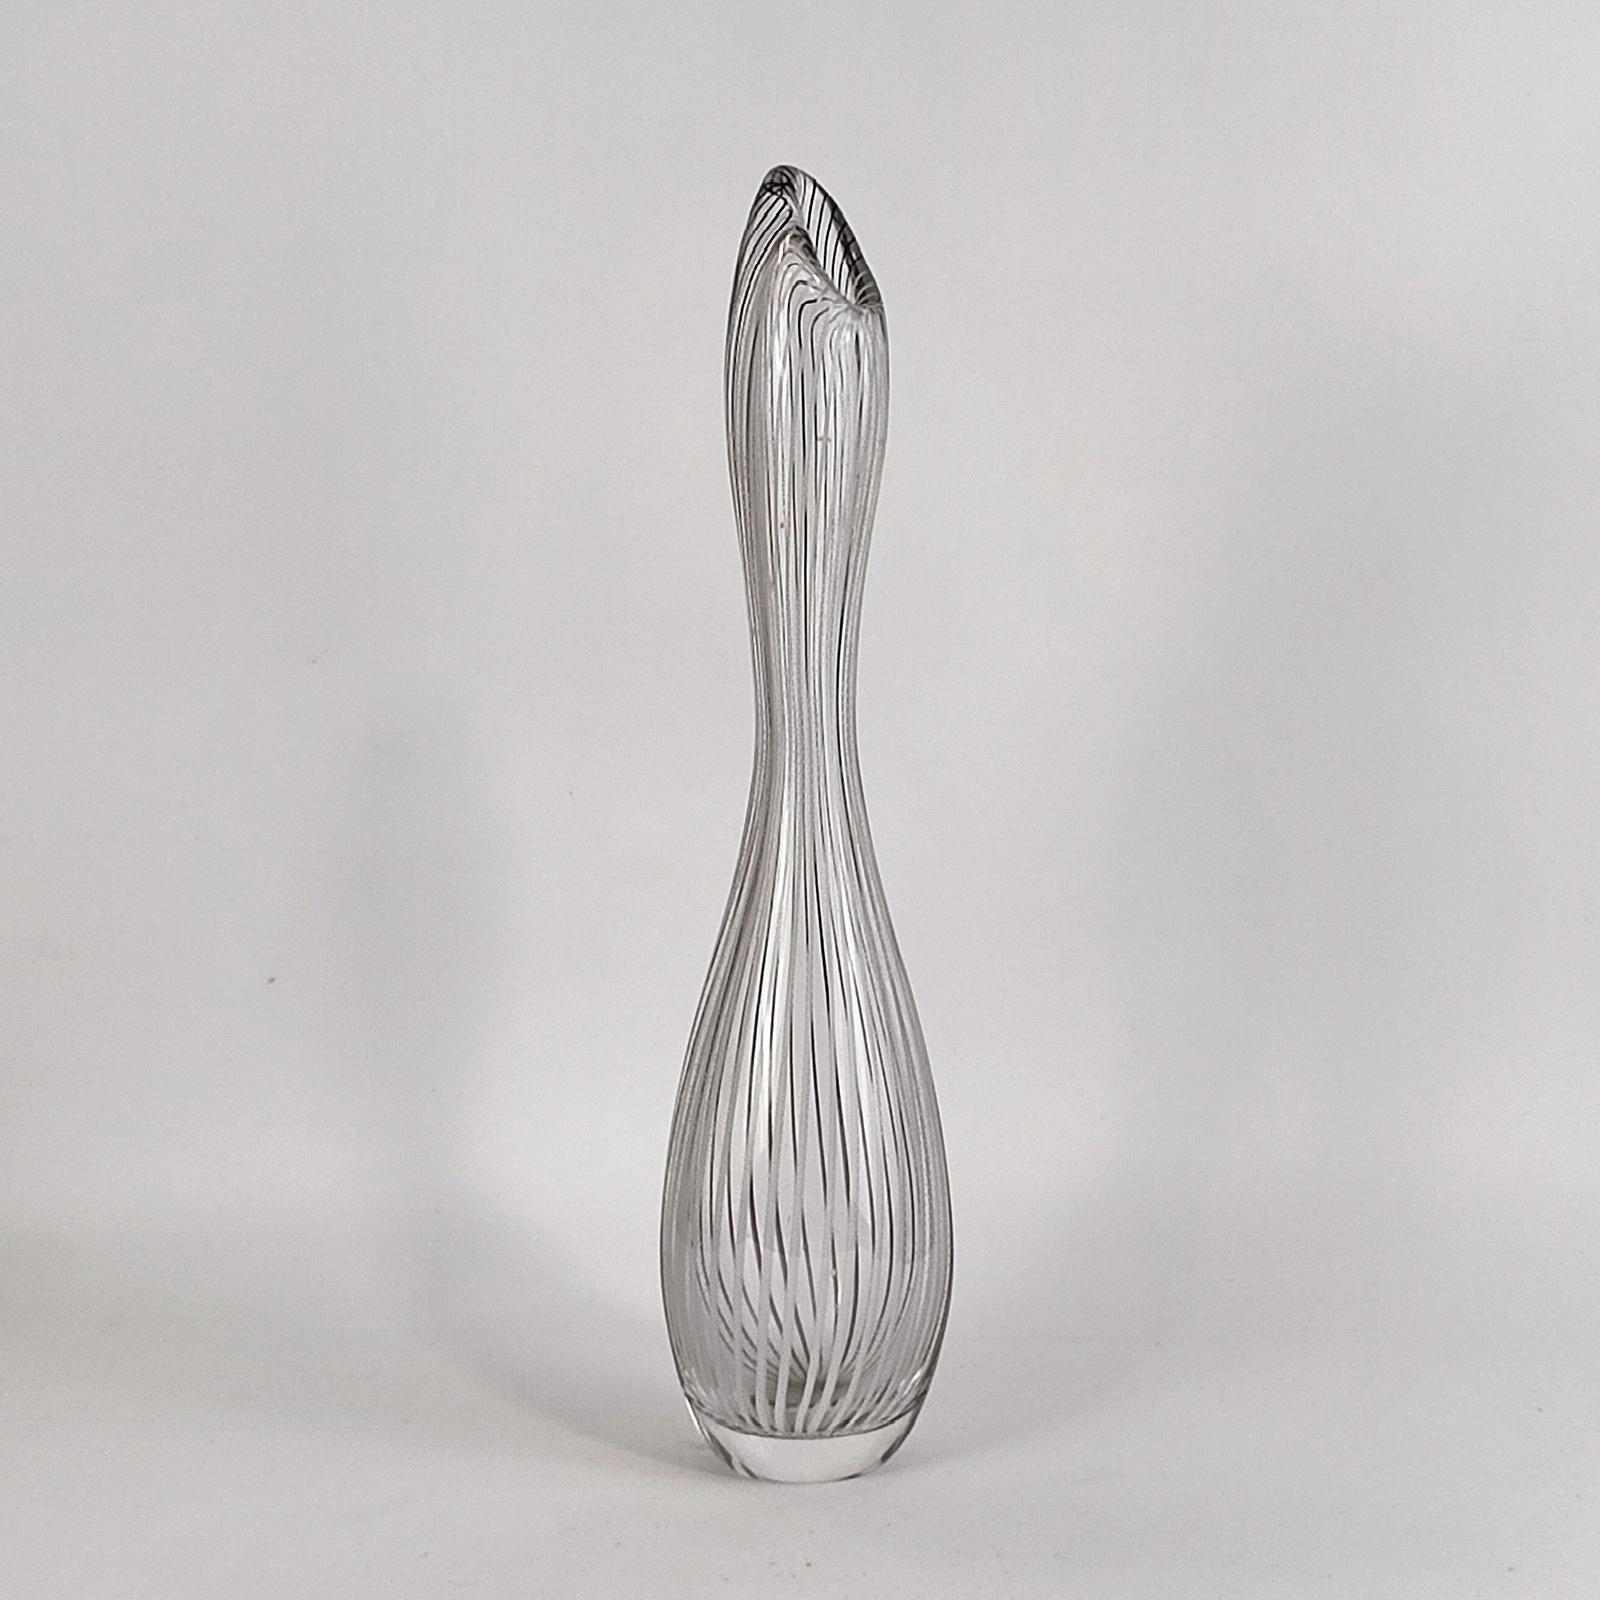 Late 20th Century Mid-Century Modern Kosta Boda Glass Vase Designed by Vicke Lindstrand For Sale